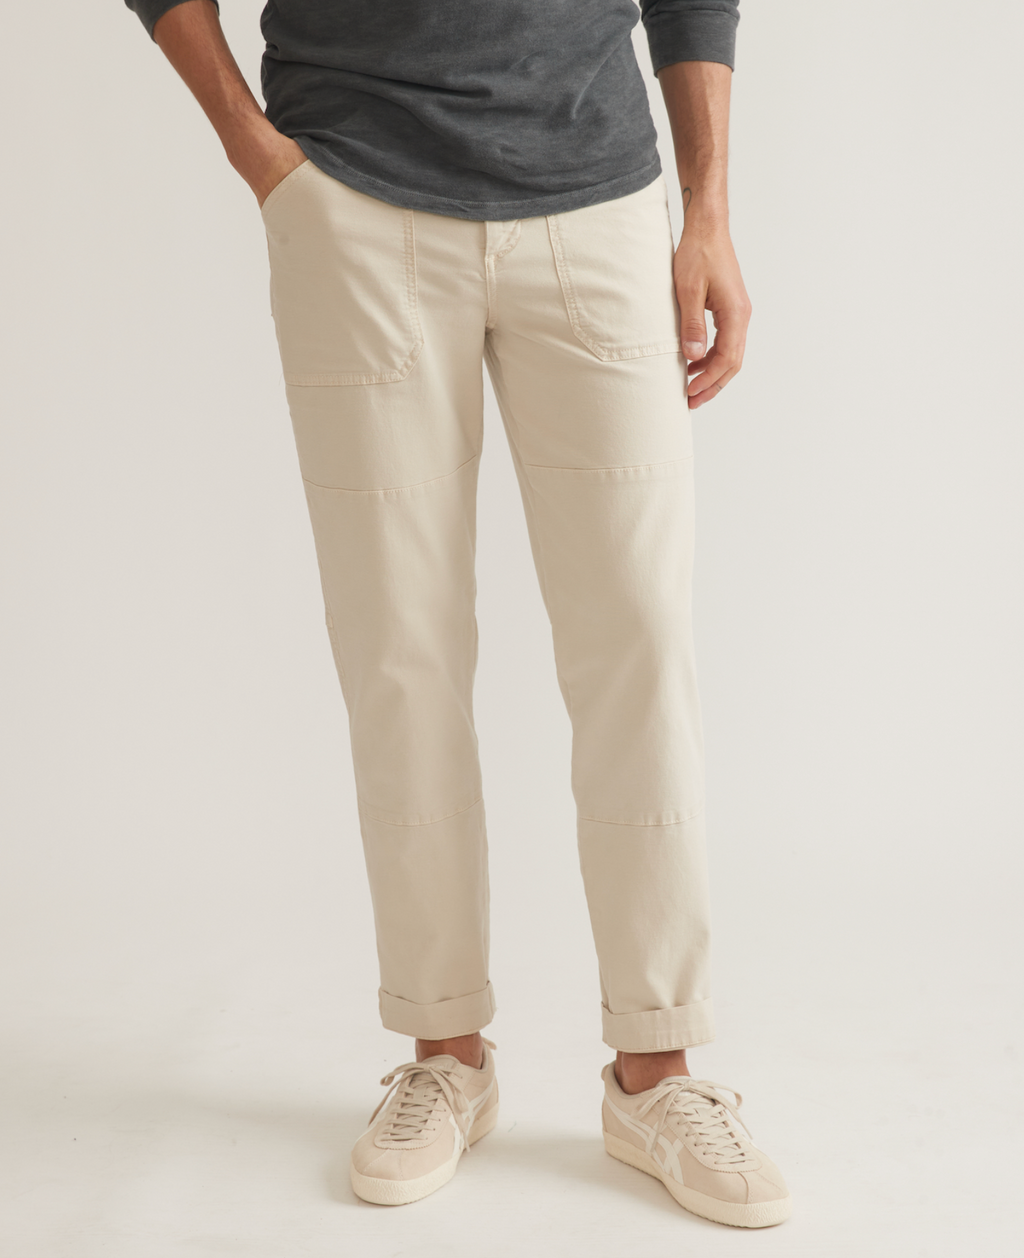 Marine Layer Breyer Utility Pant - Relaxed Fit